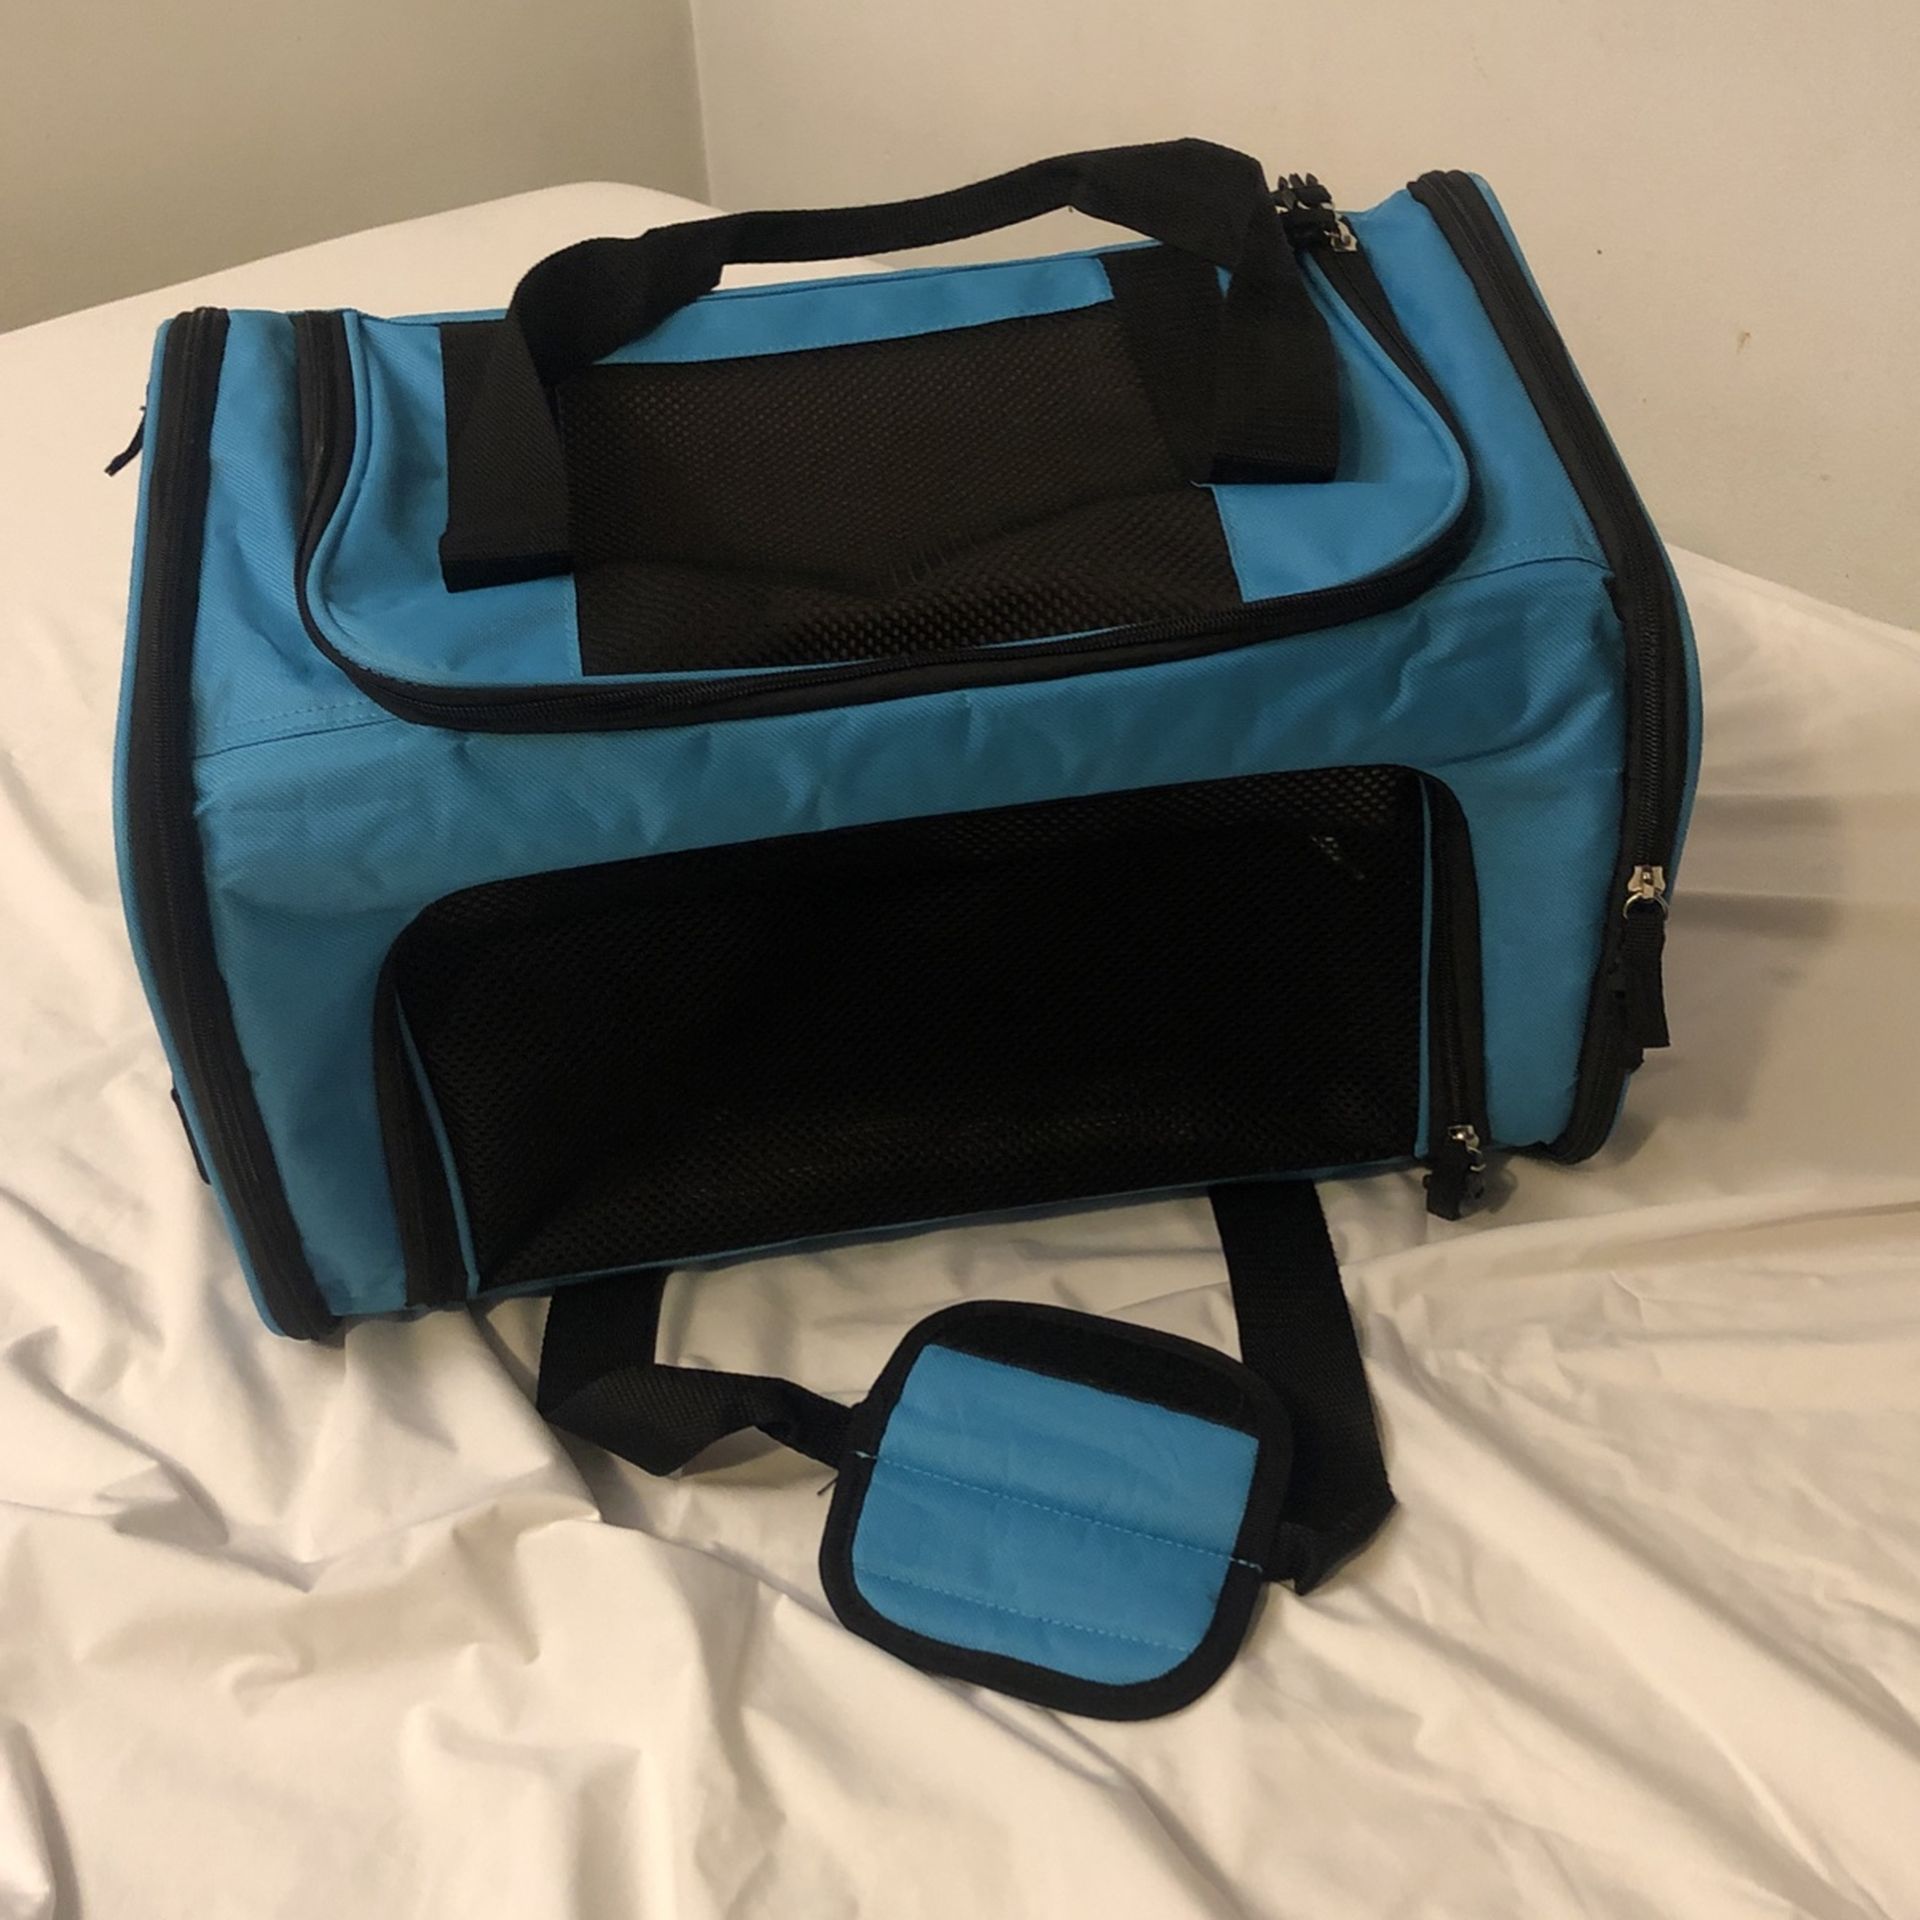 Pet carrier for cats and small dogs